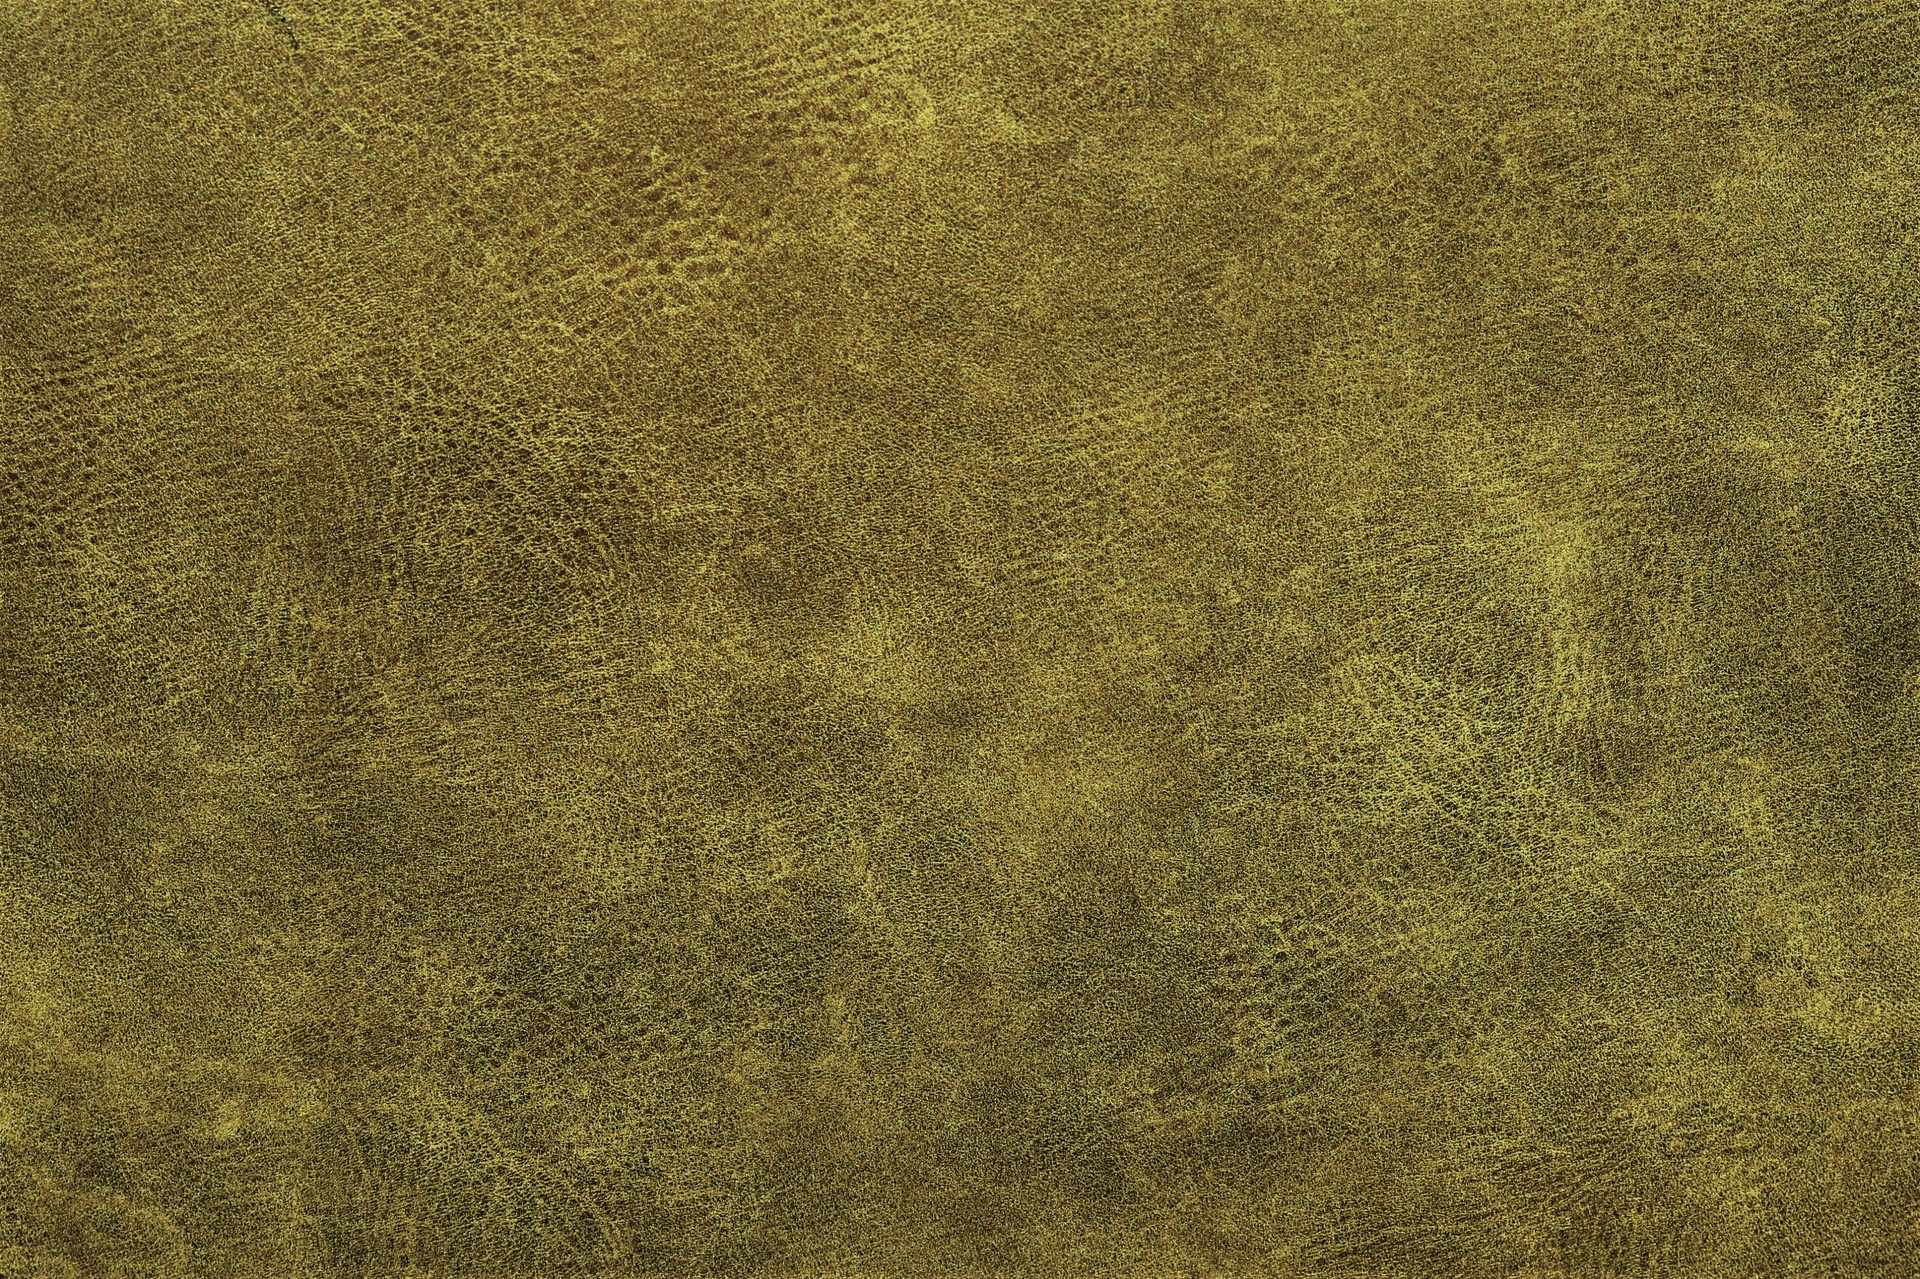 Green Leather Texture Background